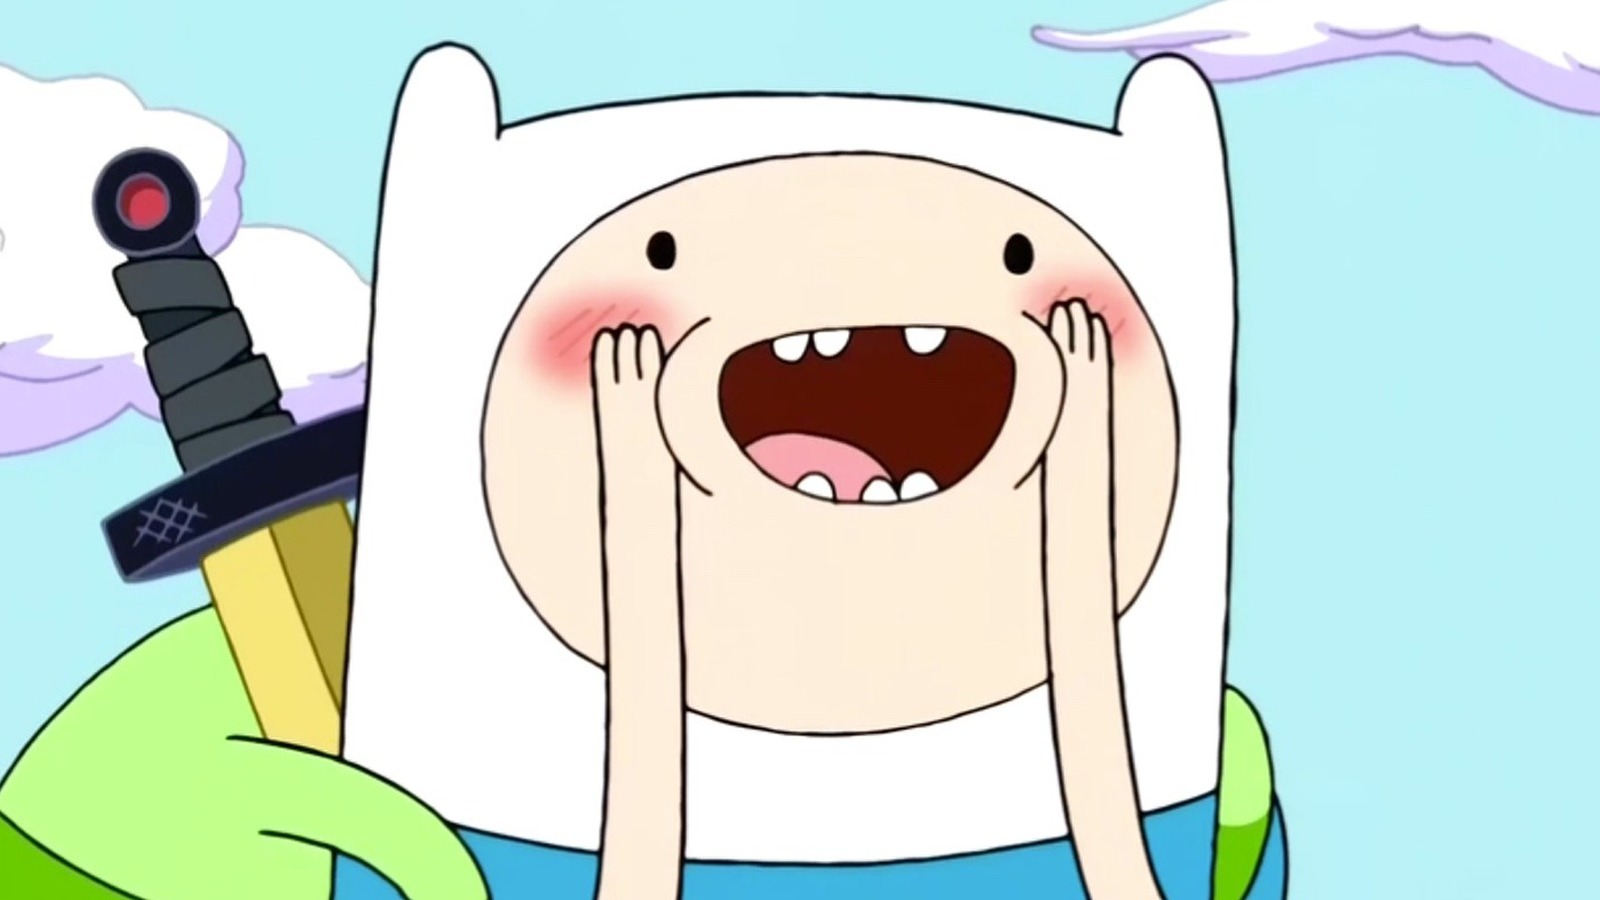 25 Shows Like Adventure Time You Should Watch Next